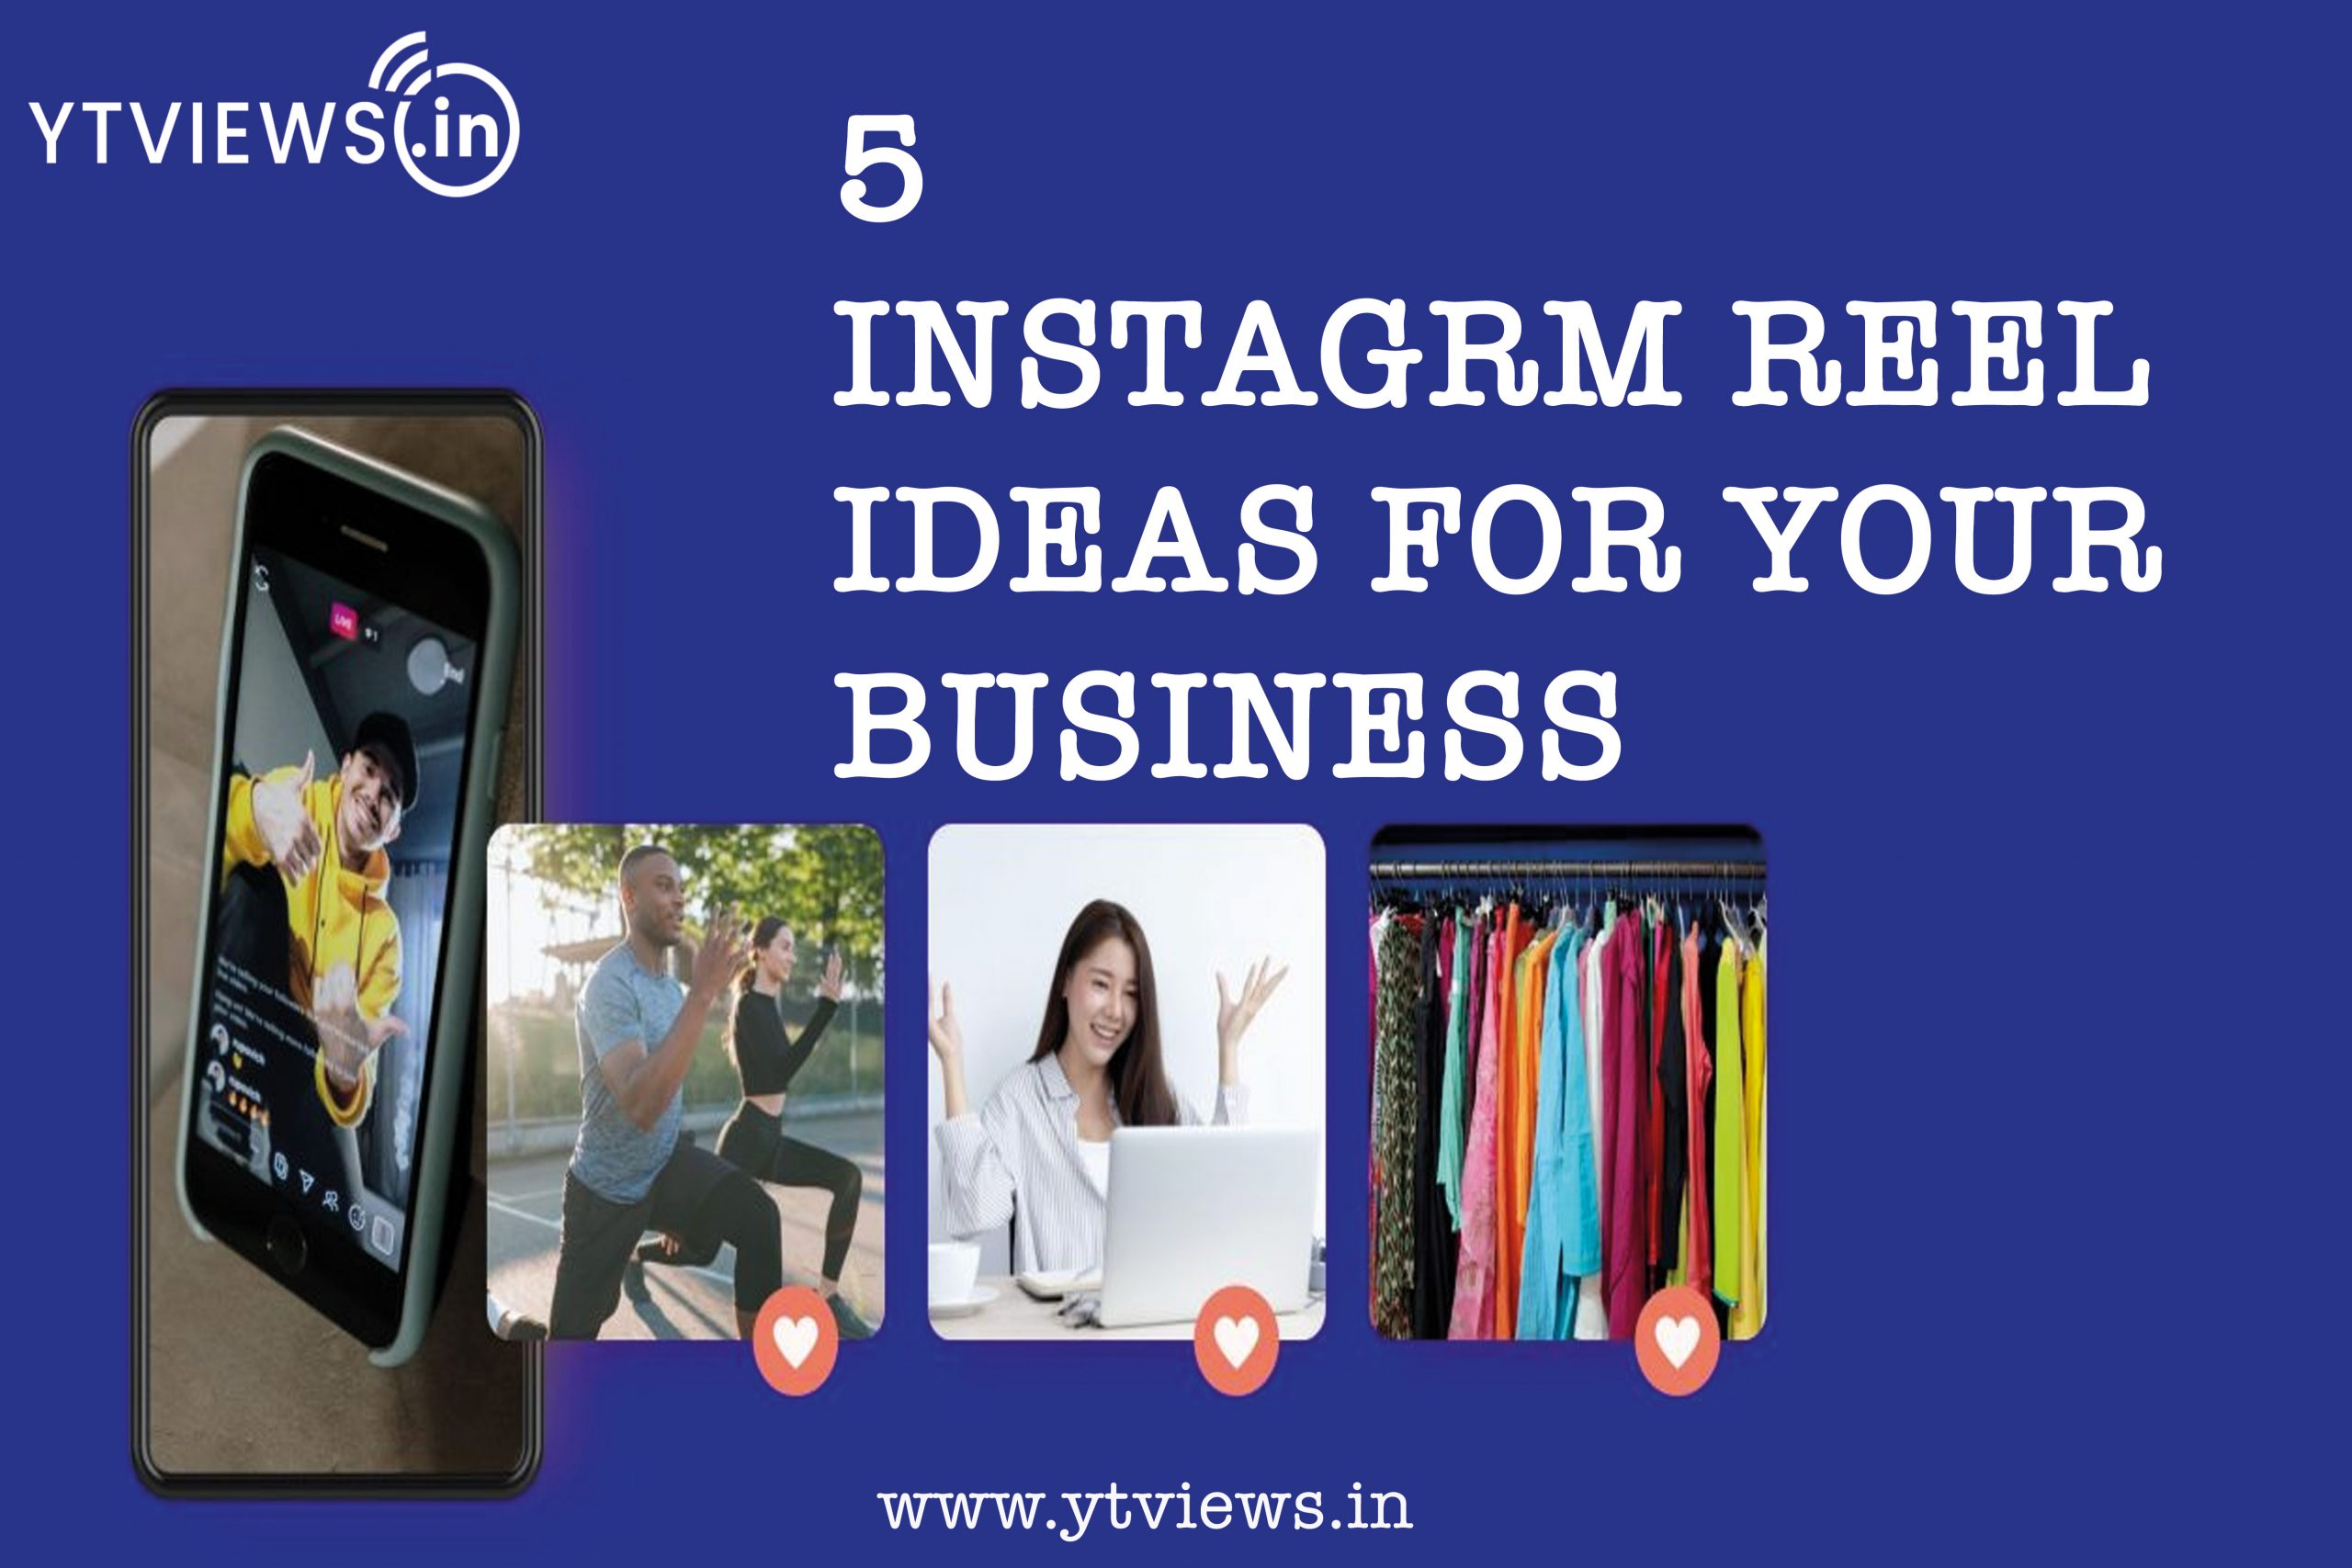 5 Instagram reel ideas for your business